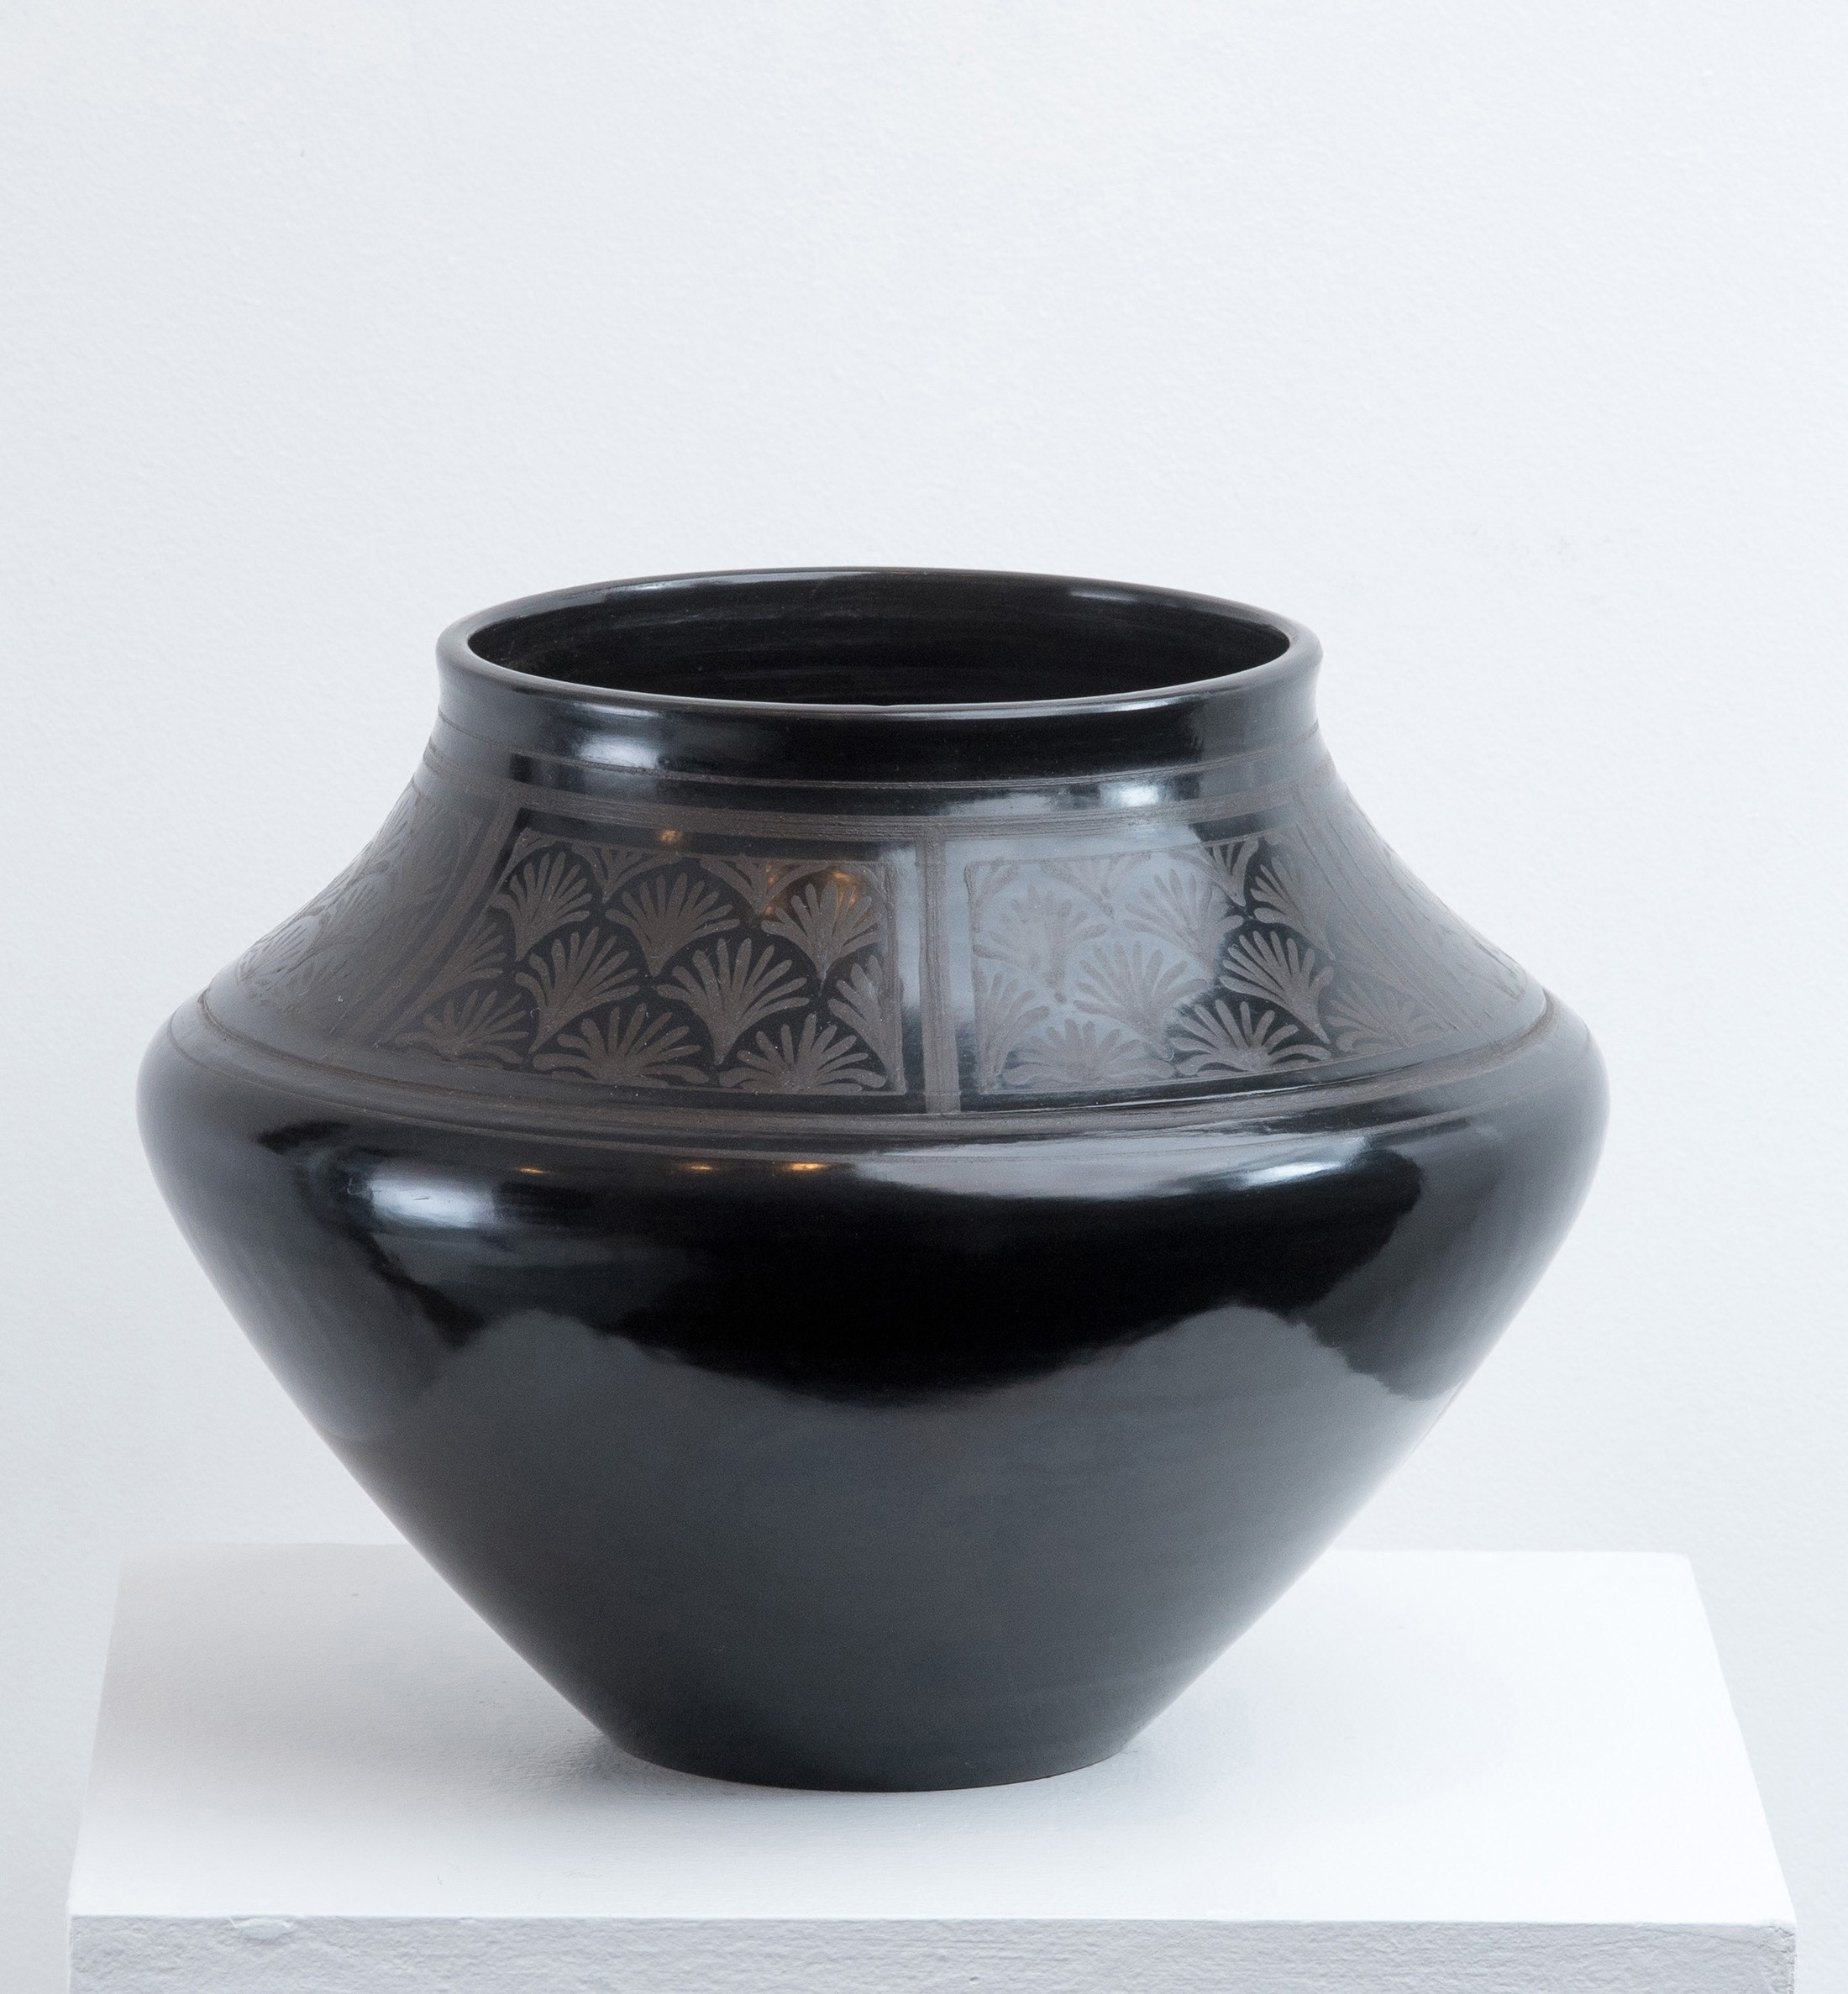 13 Stylish Terracotta Clay Vase 2024 free download terracotta clay vase of tydd pottery tapered vessel with fan pattern sarah wiseman gallery with regard to tapered vessel with fan pattern